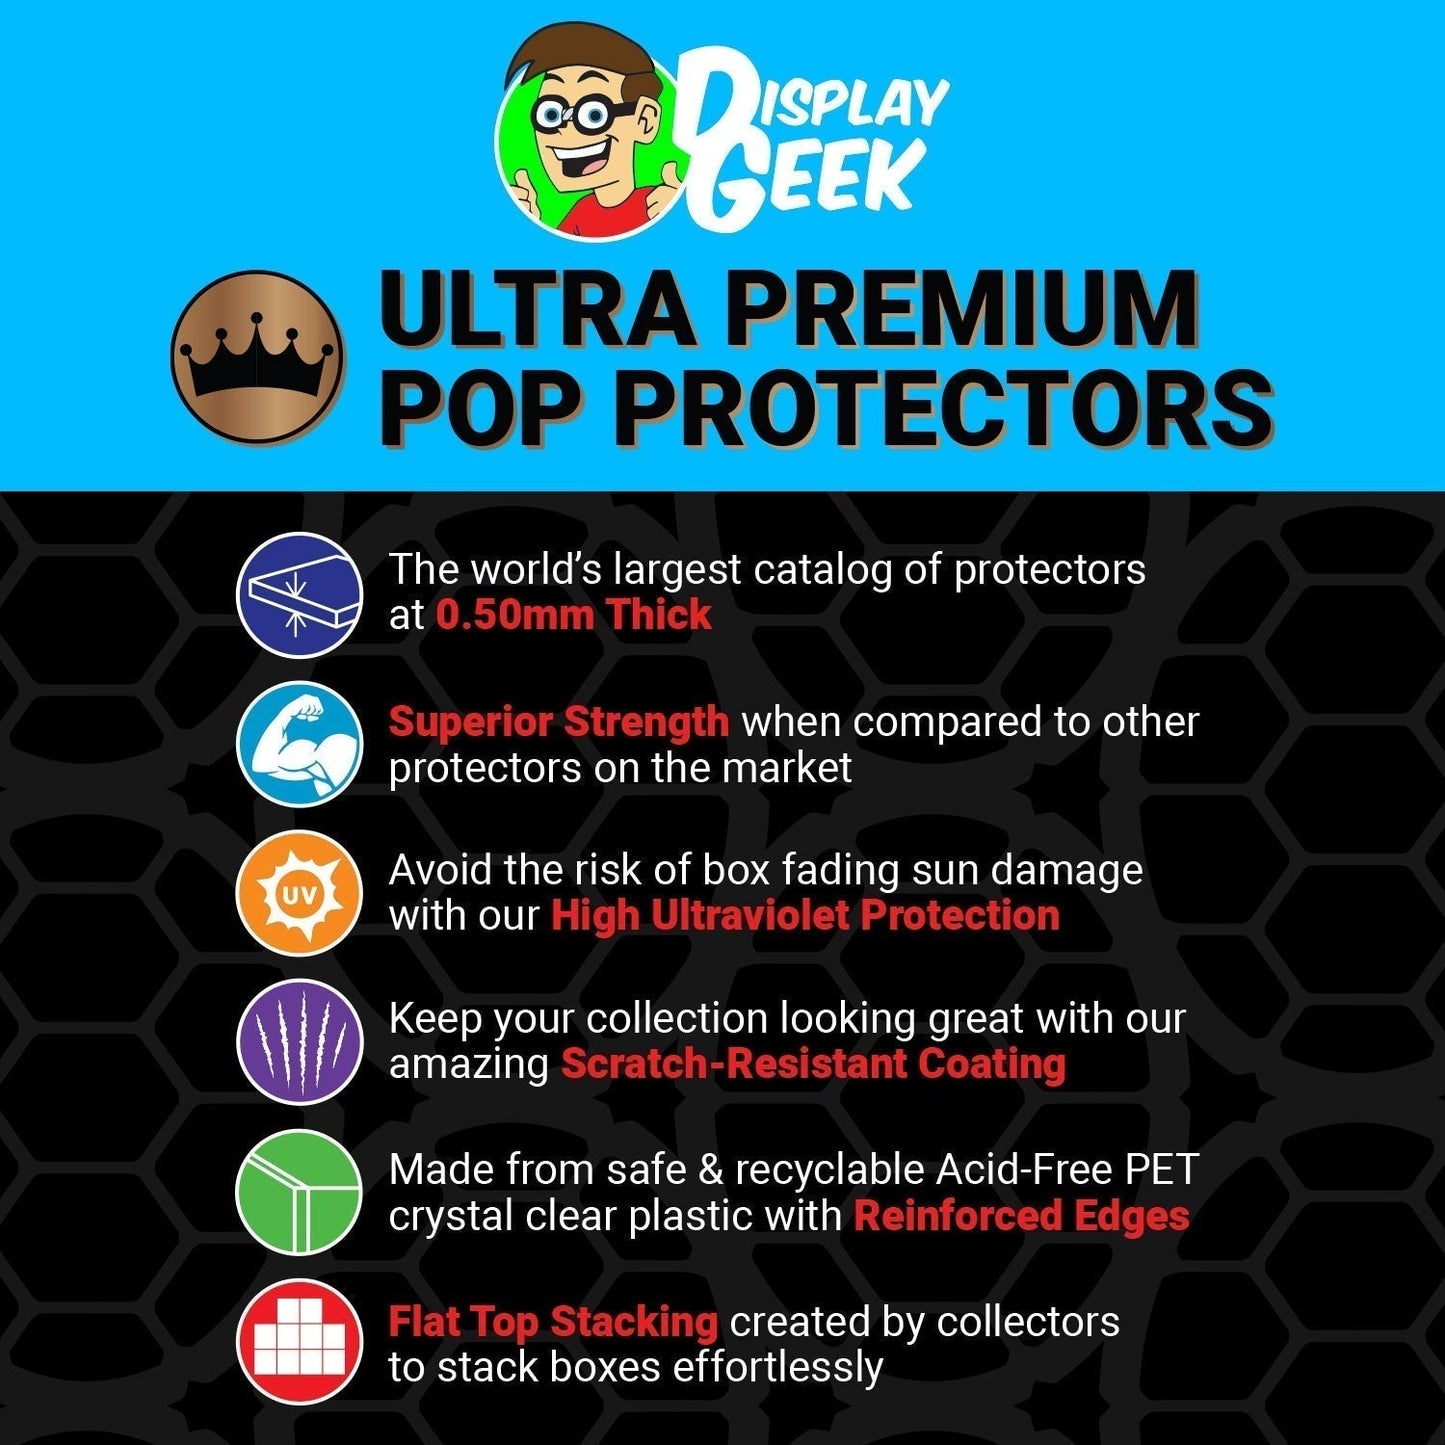 Pop Protector for Battle at Echo Base Wampa #372 Funko Pop Deluxe - PPG Pop Protector Guide Search Created by Display Geek